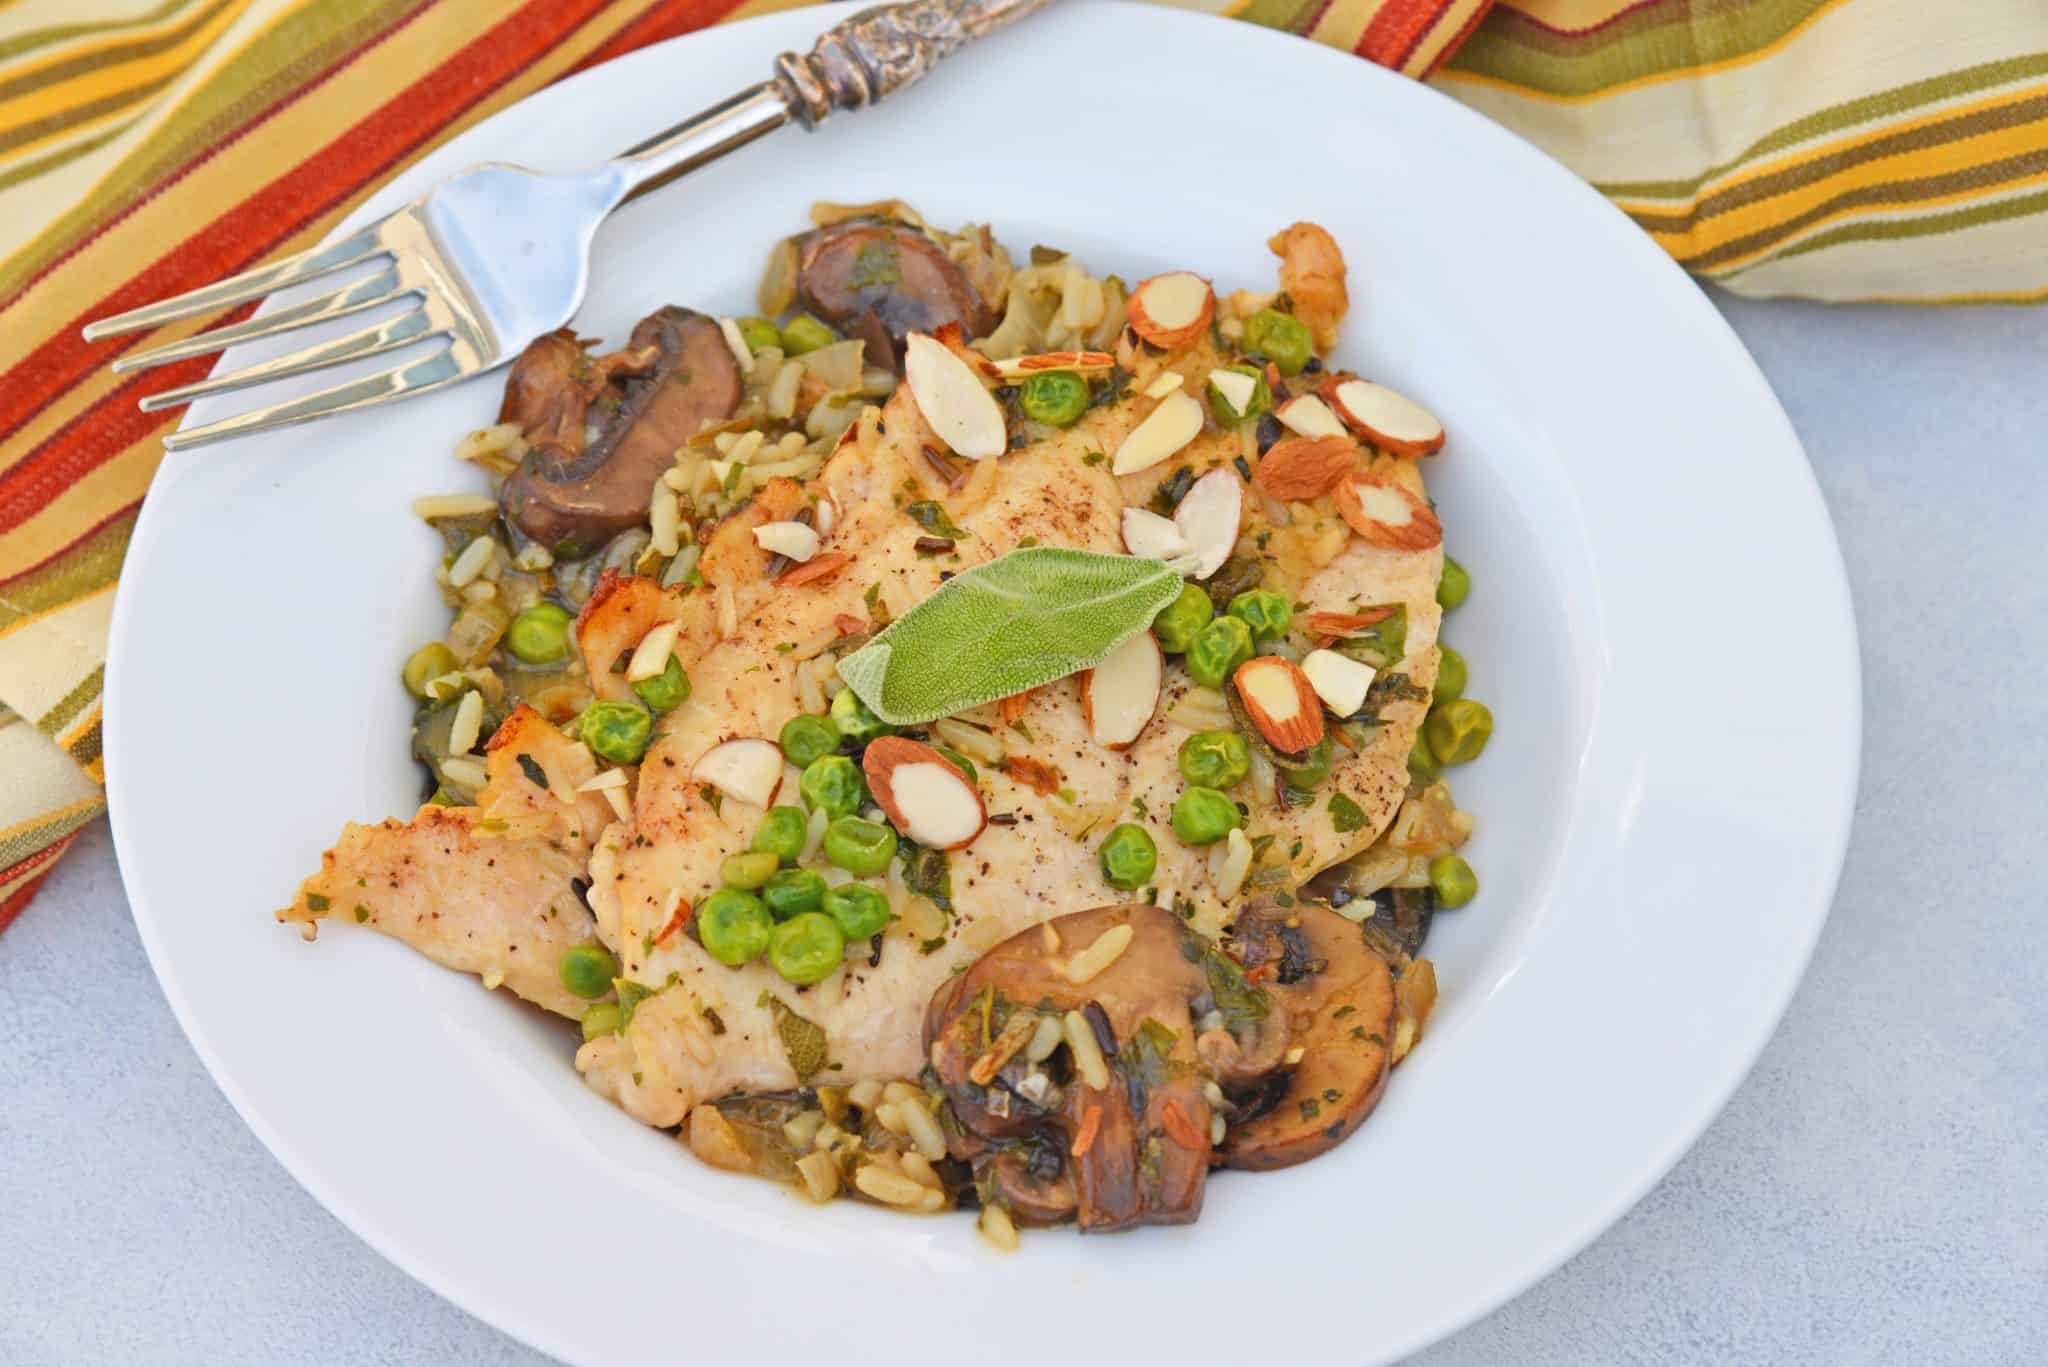 Mushroom Chicken and Rice Skillet is an easy one dish meal with loads of flavor like peas, mushrooms, shallots, sage and garlic. #onedishmeal #skilletmeal www.savoryexperiments.com